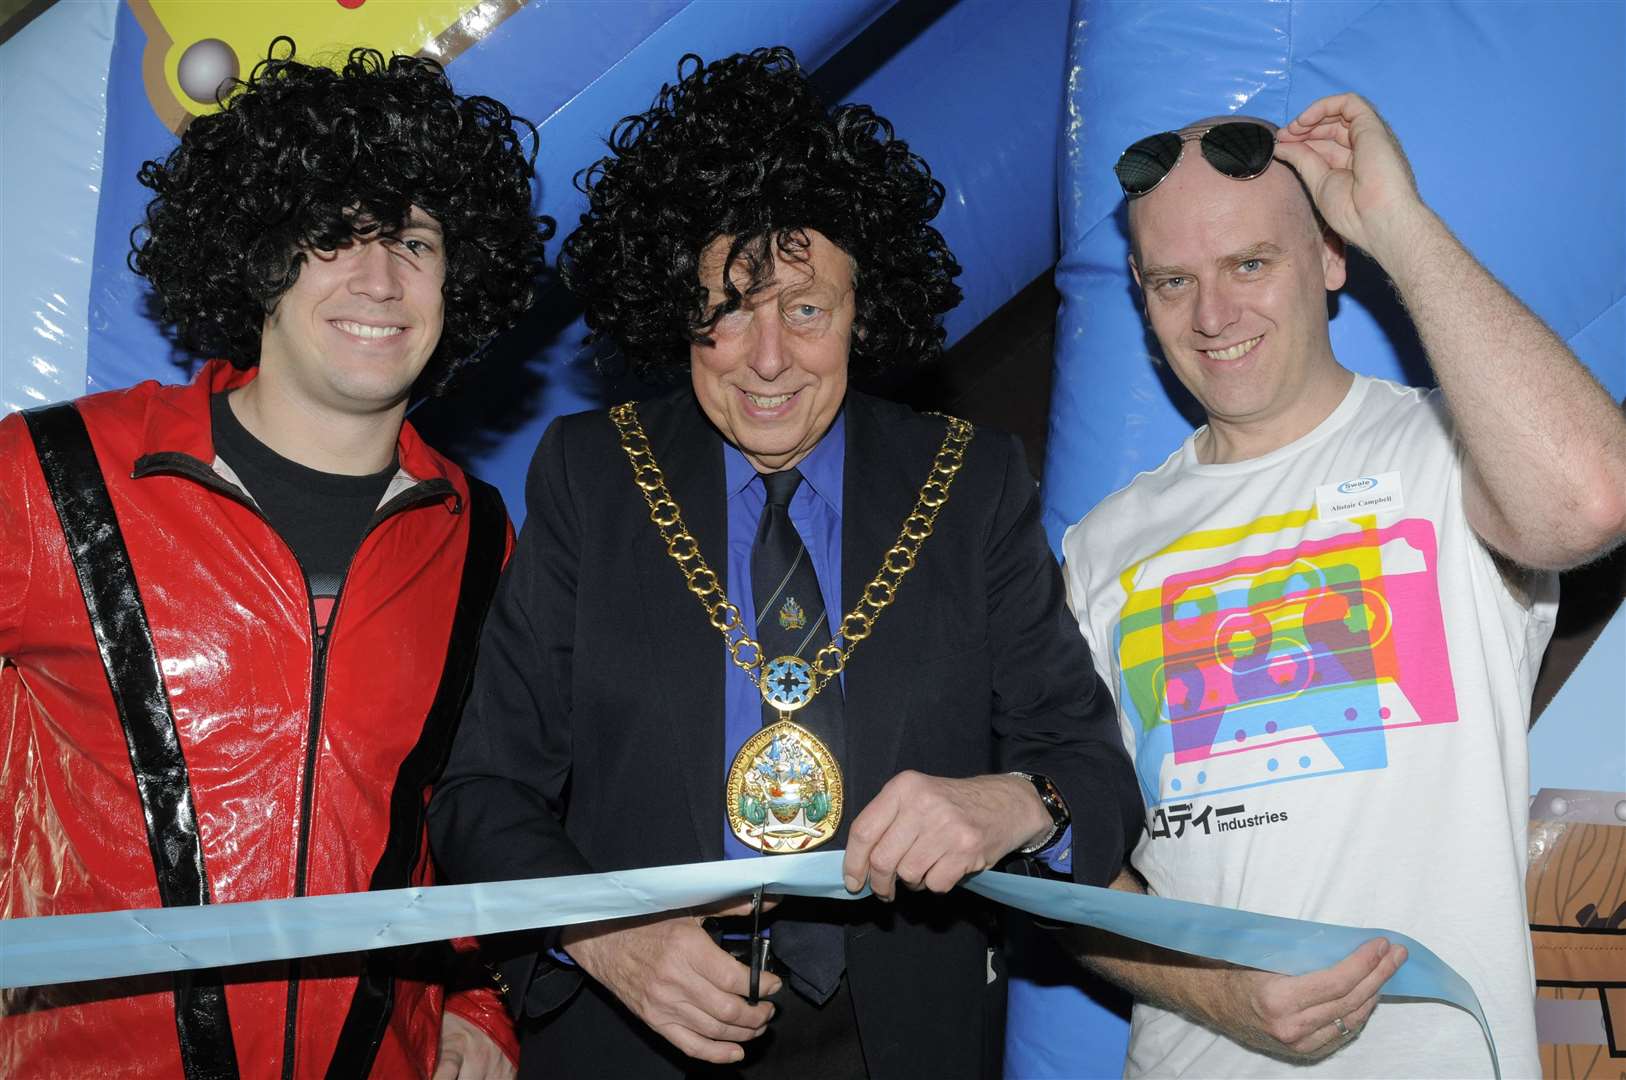 James Reynolds, then Mayor of Swale Adrian Crowther and Alistair Campbell cutting the ribbon to open a new slide and 1980s themed event to mark the 20th anniversary of the Swallows Leisure Centre, Sittingbourne. Picture: Andy Payton